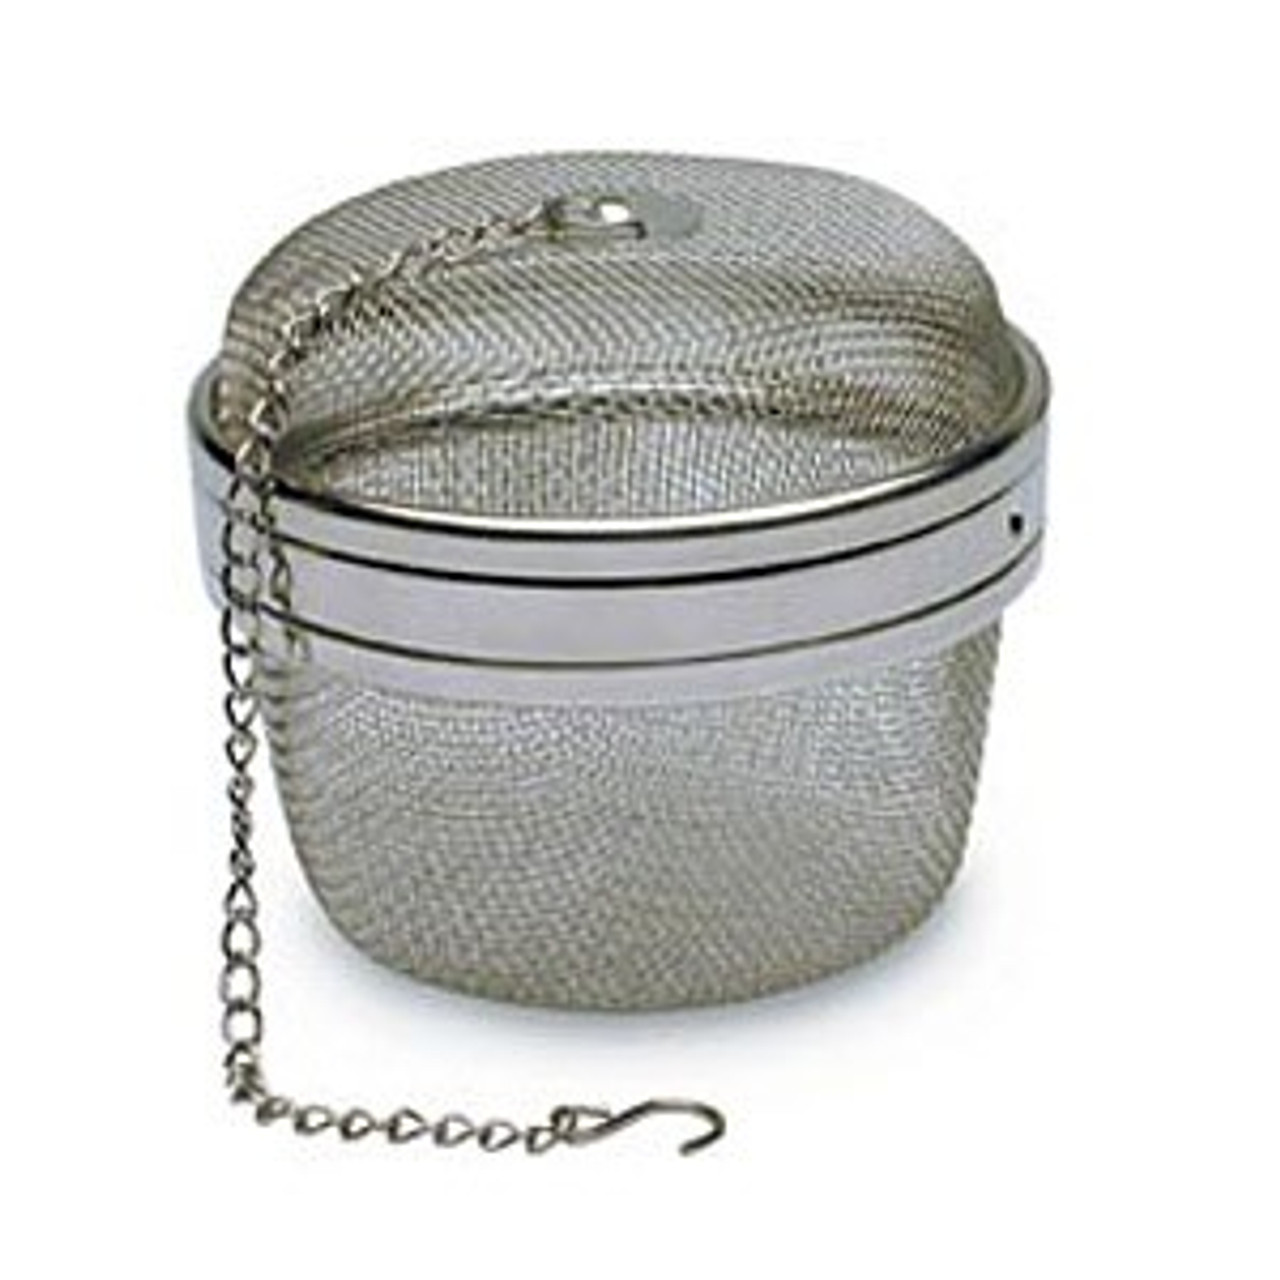 Tea Strainer - Extra Large Stainless Steel Mesh Ball 5"x4"